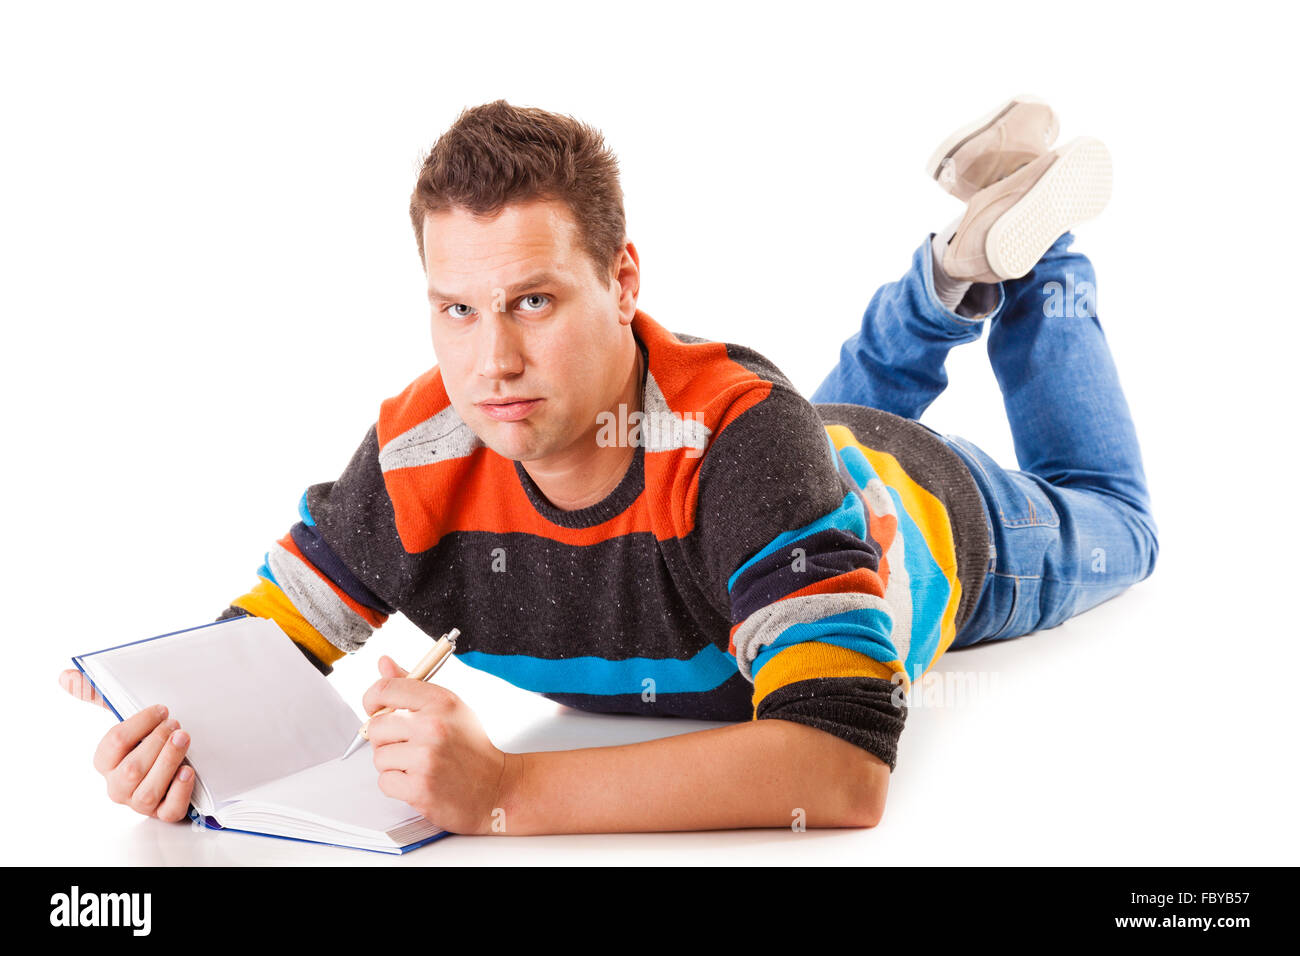 tired college student with book lying on floor preparing studying hard work for exam isolated on white background Stock Photo